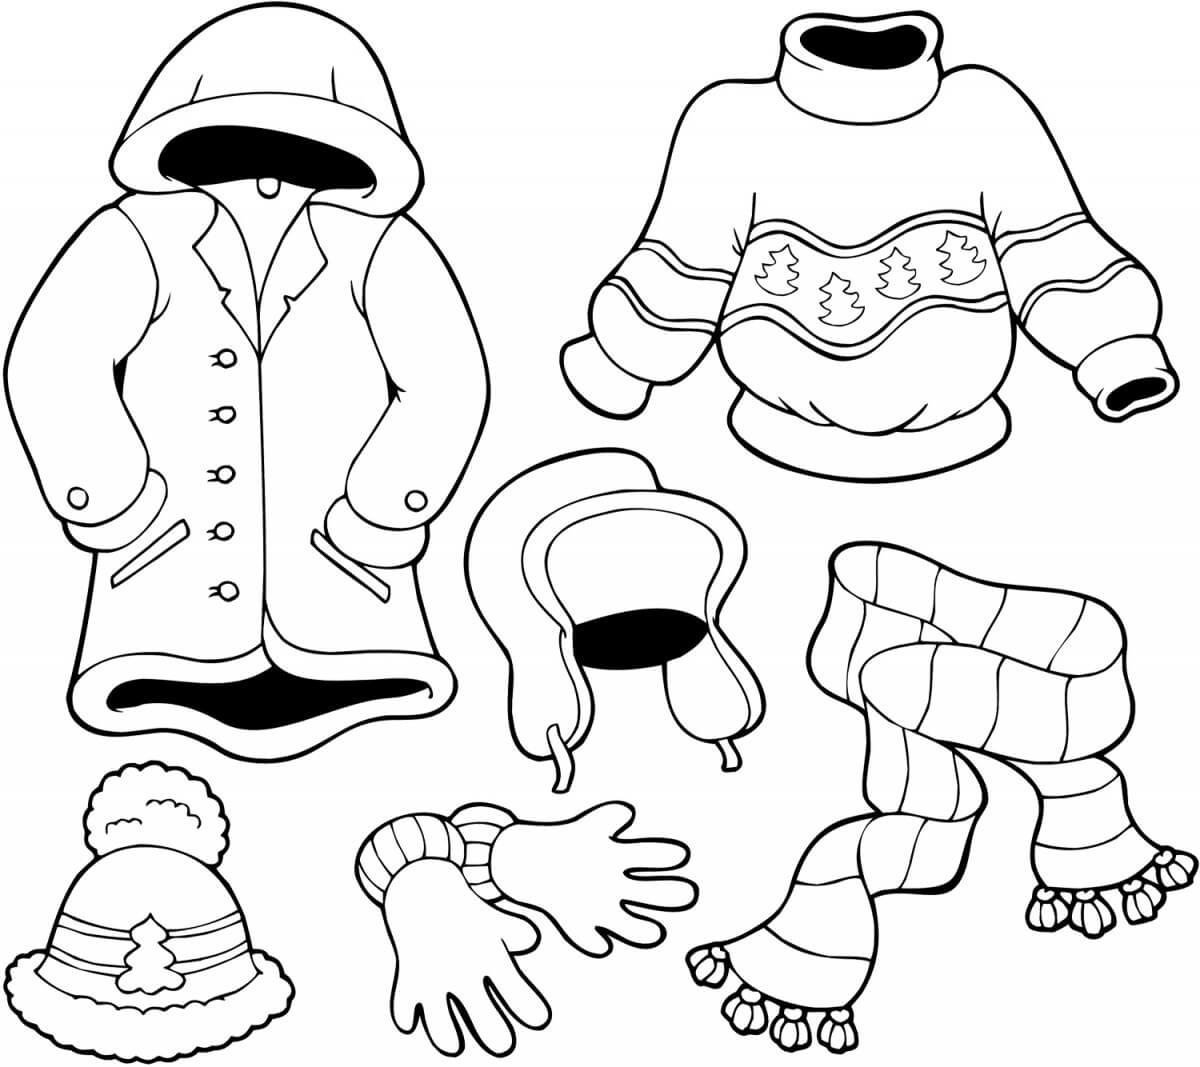 Winter Clothes Coloring Page